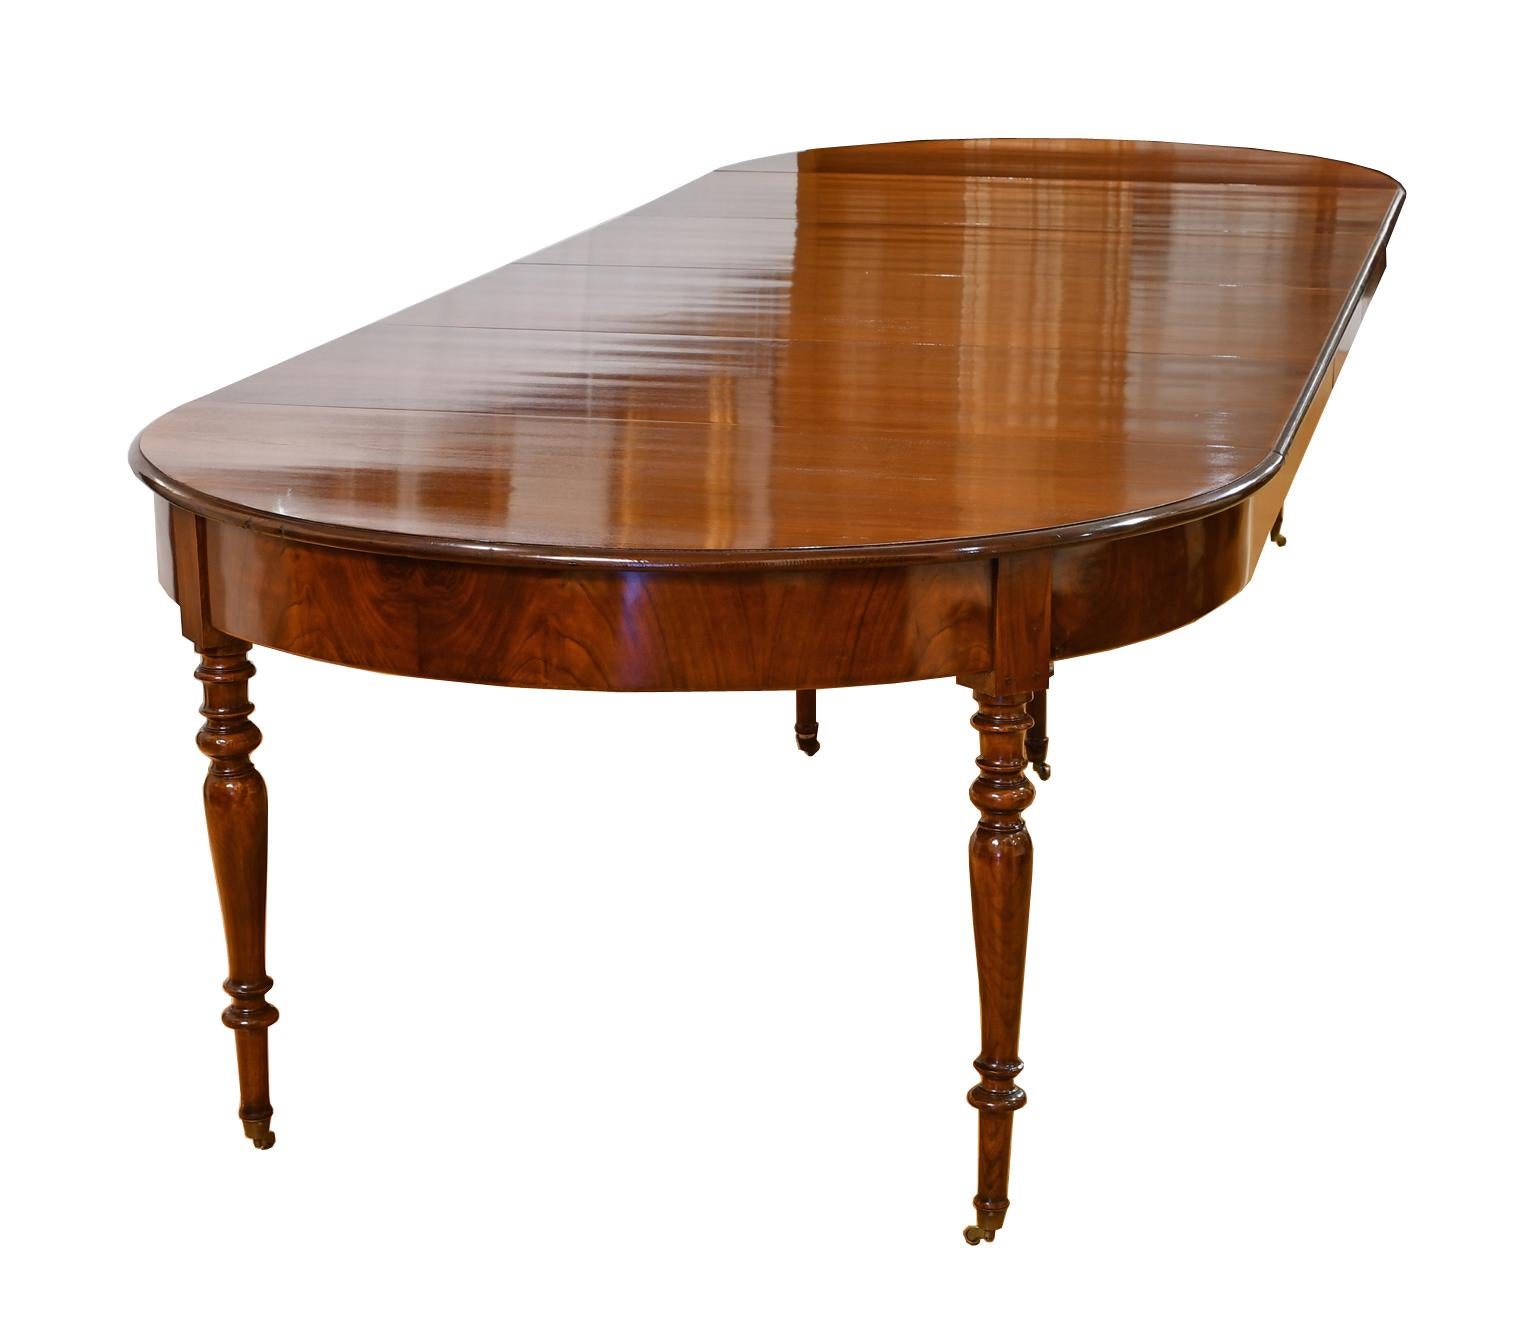 A very beautiful antique Christian VIII dining table in fine West Indies (Cuban) mahogany with four leaves that extend it to 12 feet in length. Table features a racetrack top with ebonized ogee edge, skirted leaves & finely-turned legs. The fine